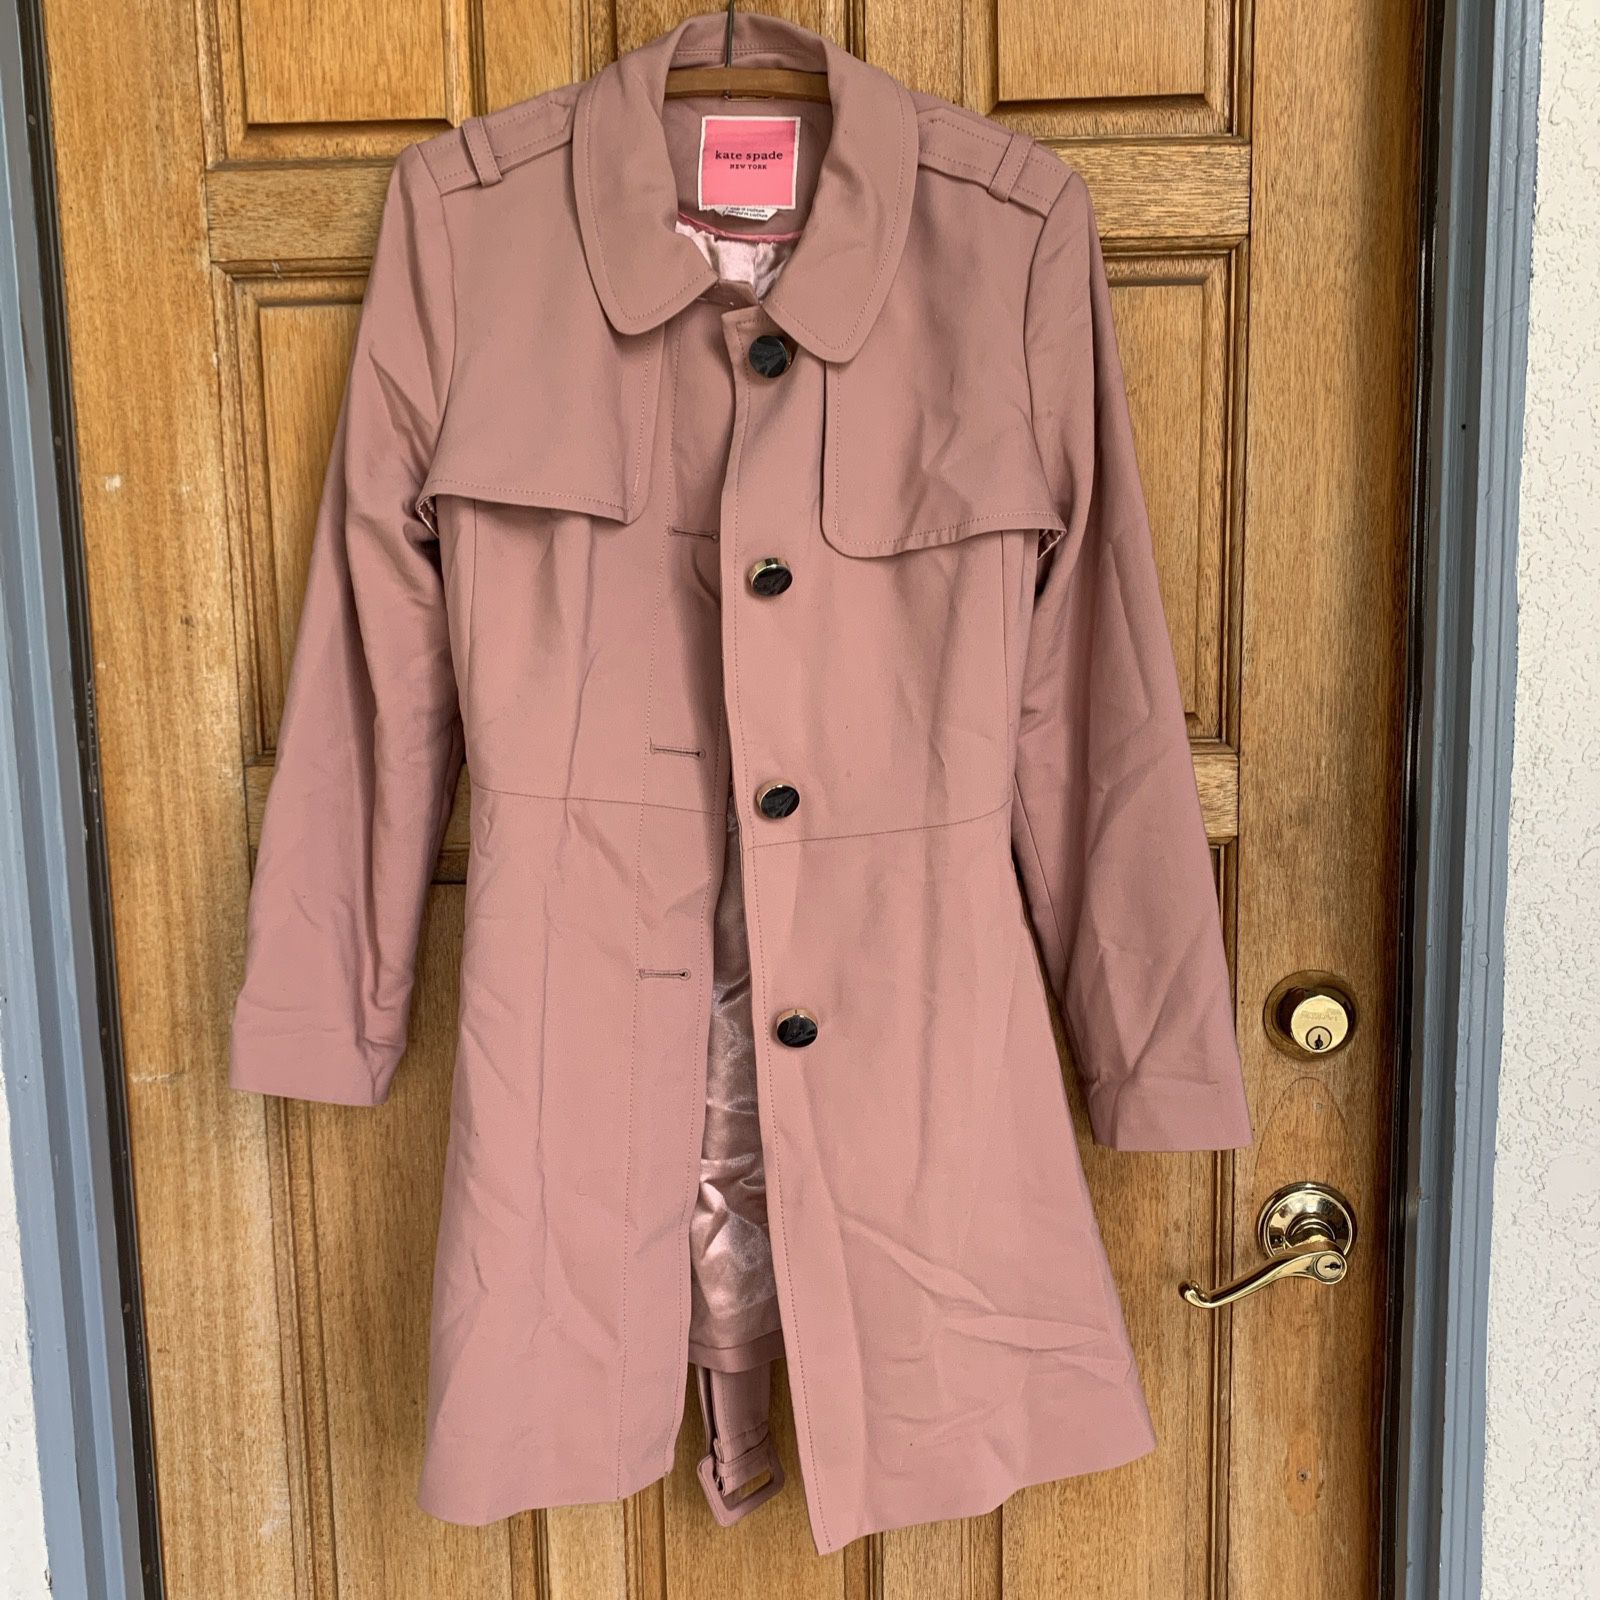 KATE SPADE New York CAMEO PINK Raincoat Belted Swing Trench Coat Size L